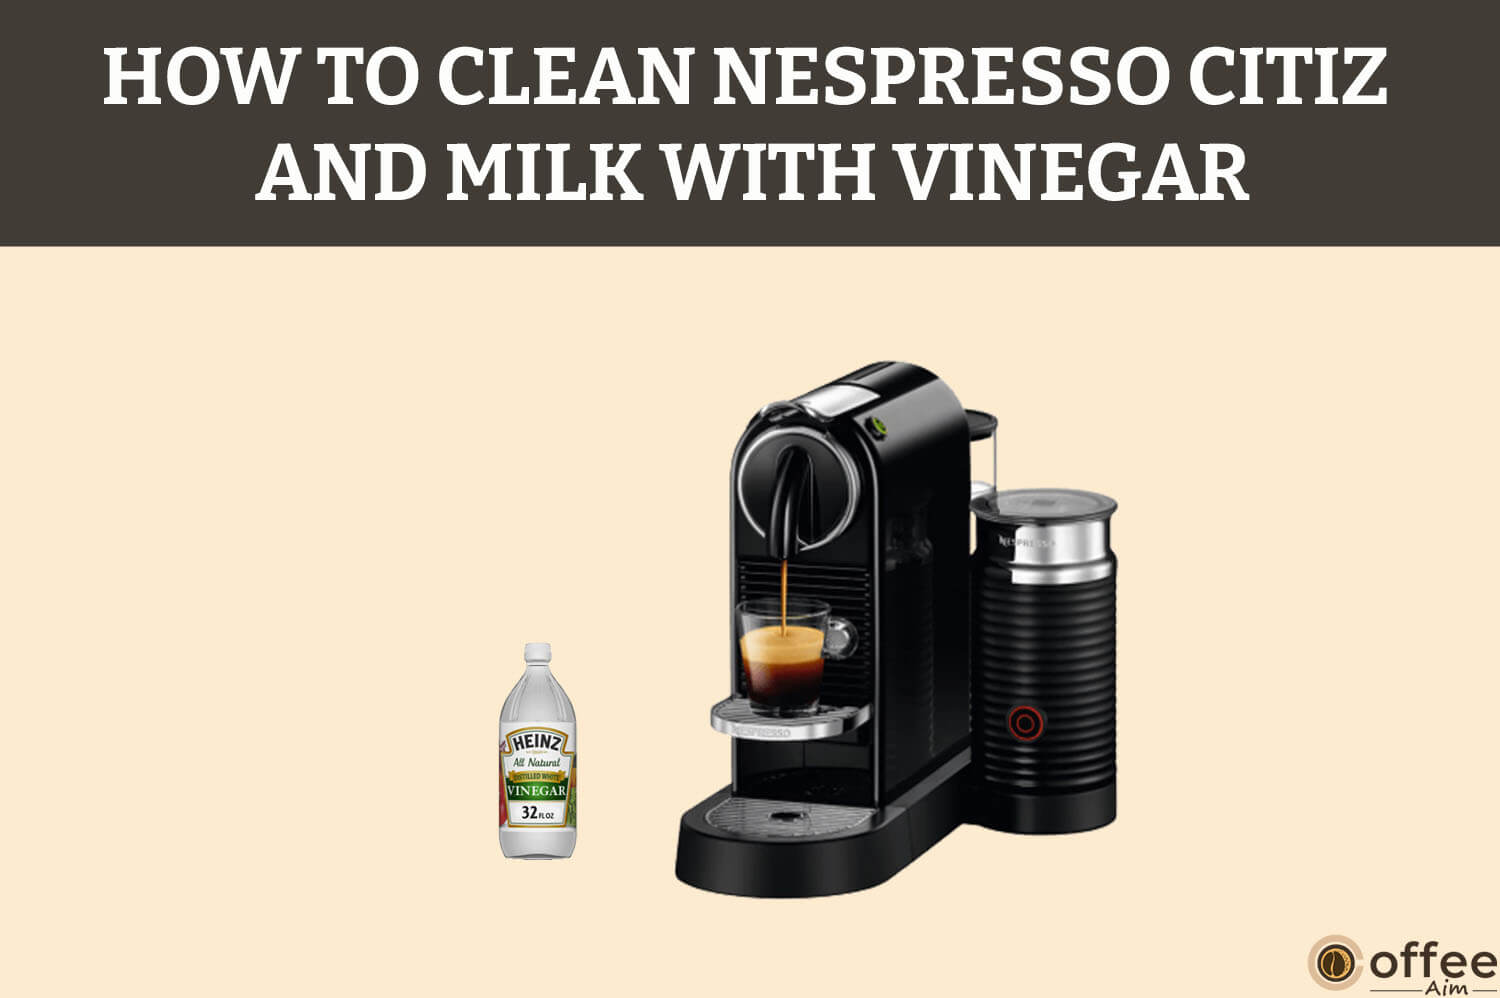 How To Clean Nespresso Citiz And Milk With Vinegar